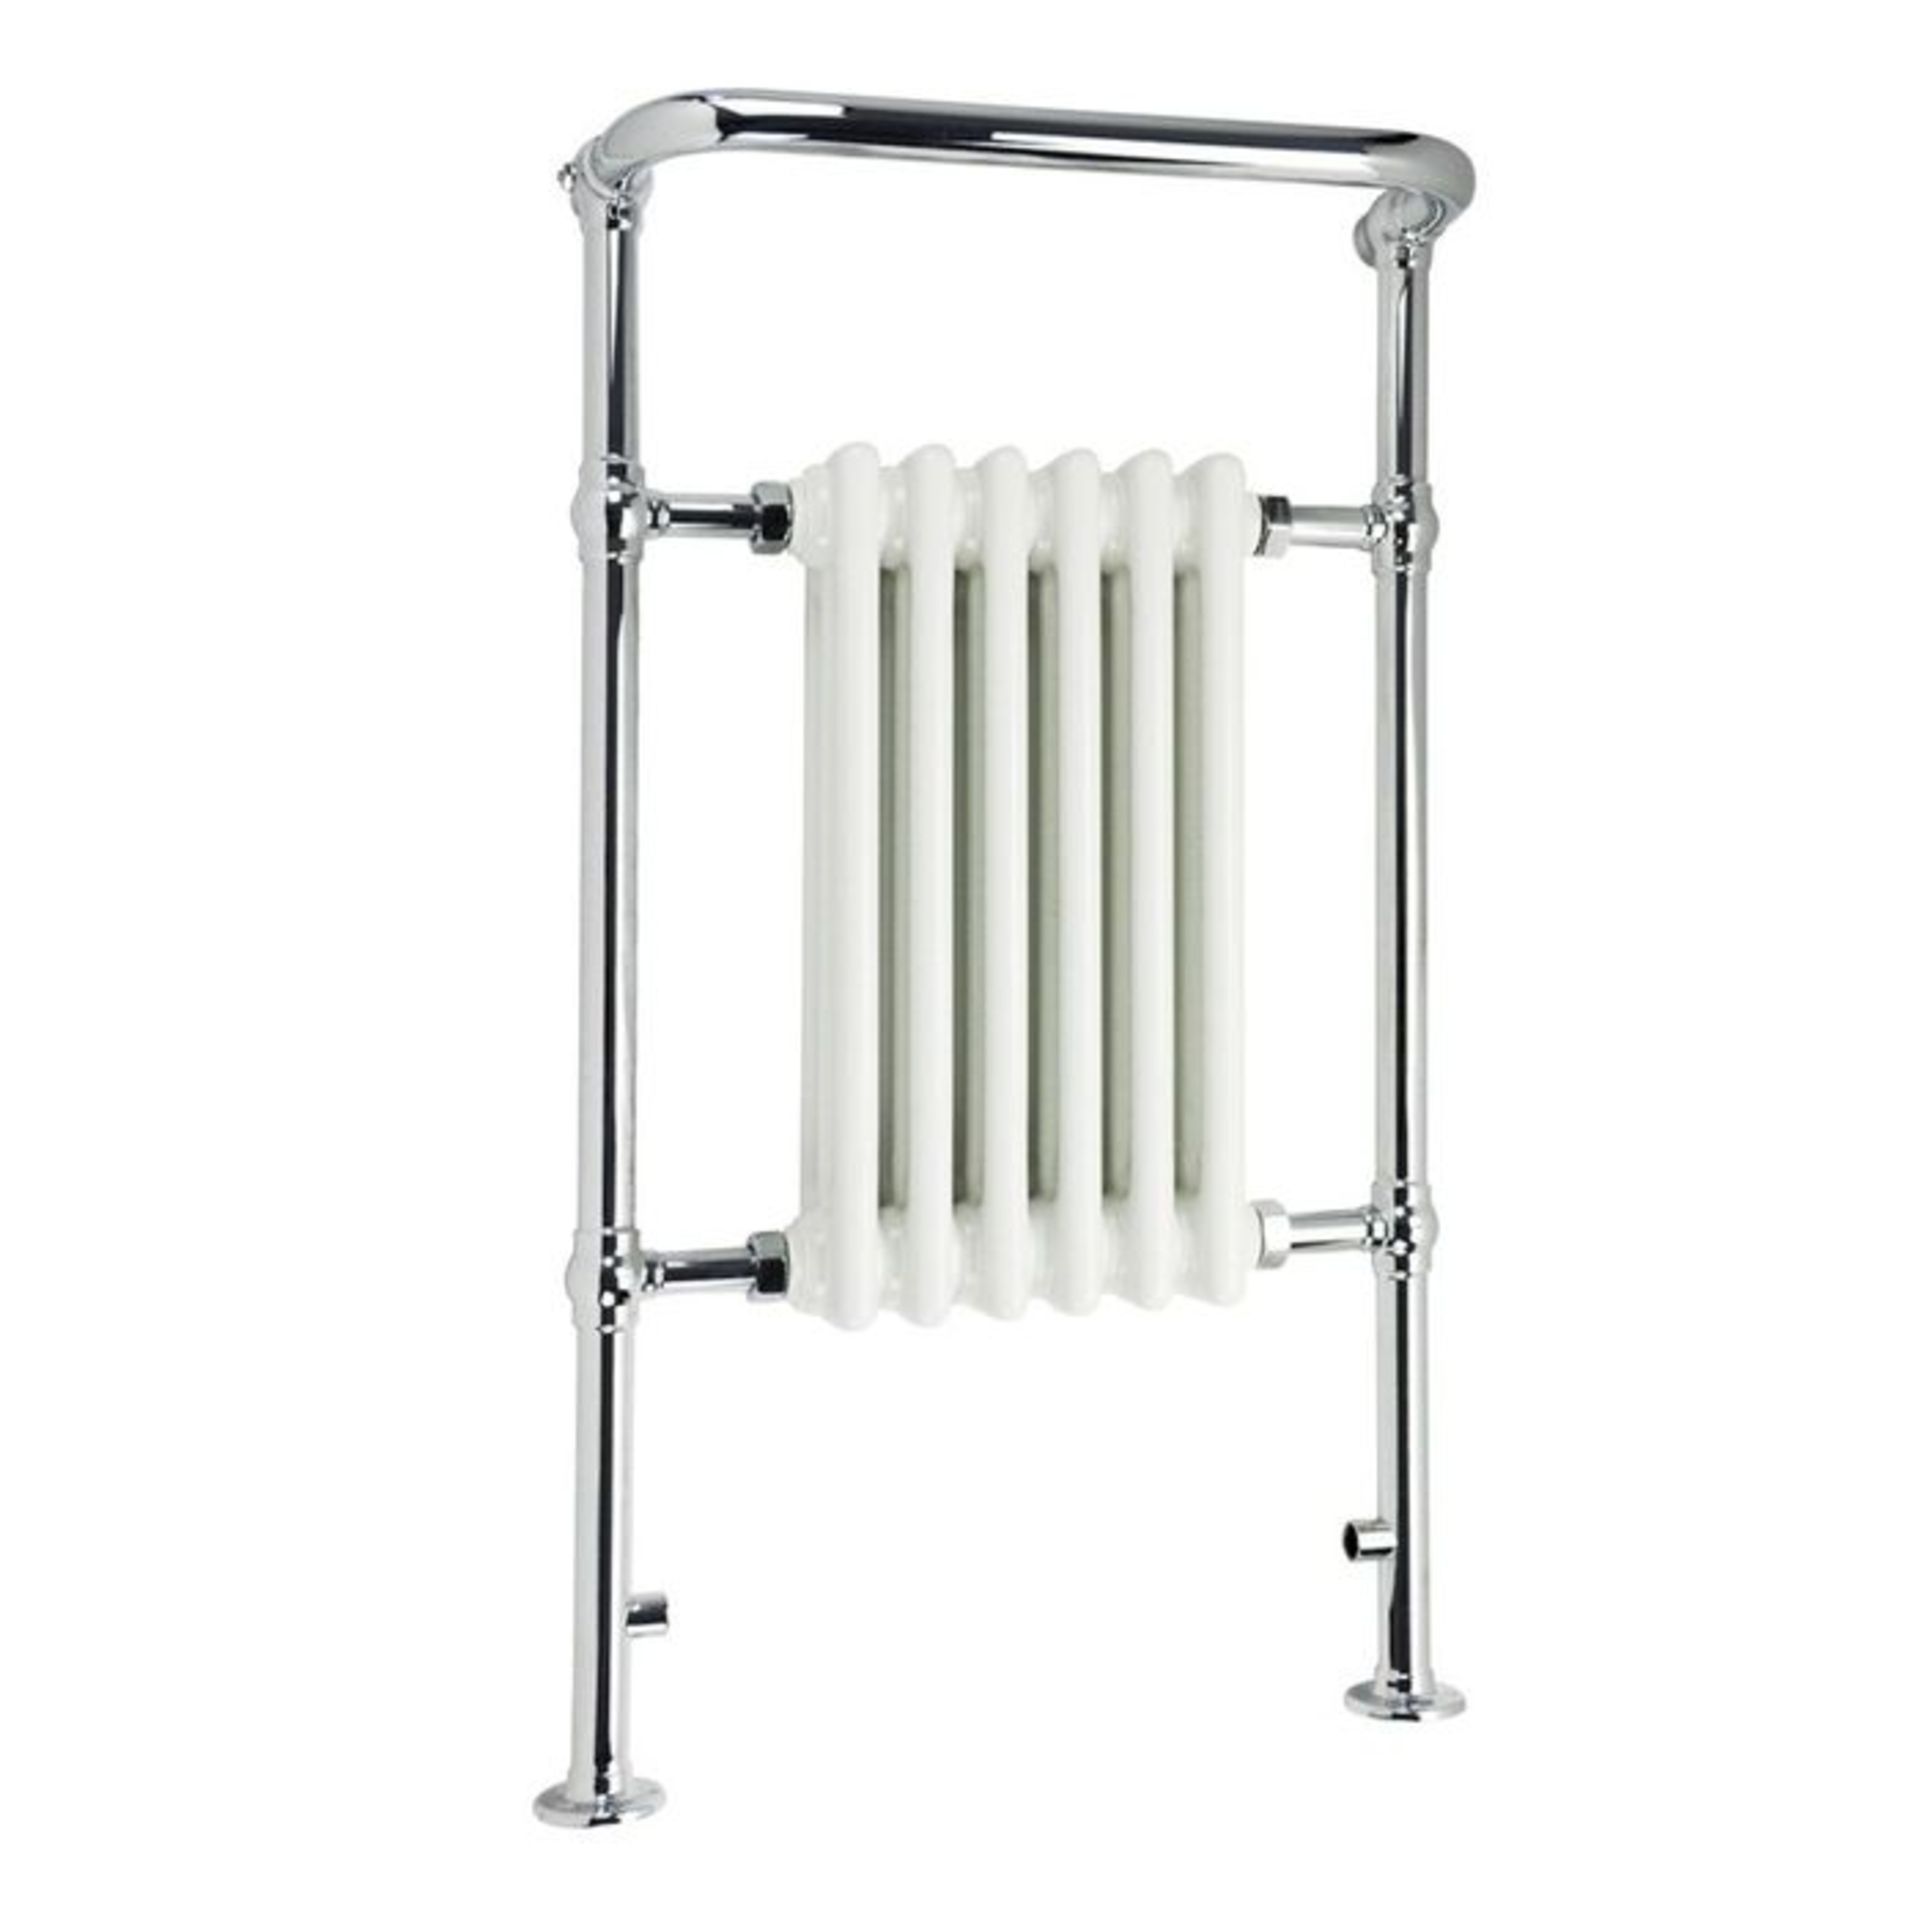 (P110) 963x583mm Medium Traditional White Towel Rail Radiator - Cambridge. RRP £305.99. Made from - Image 3 of 3